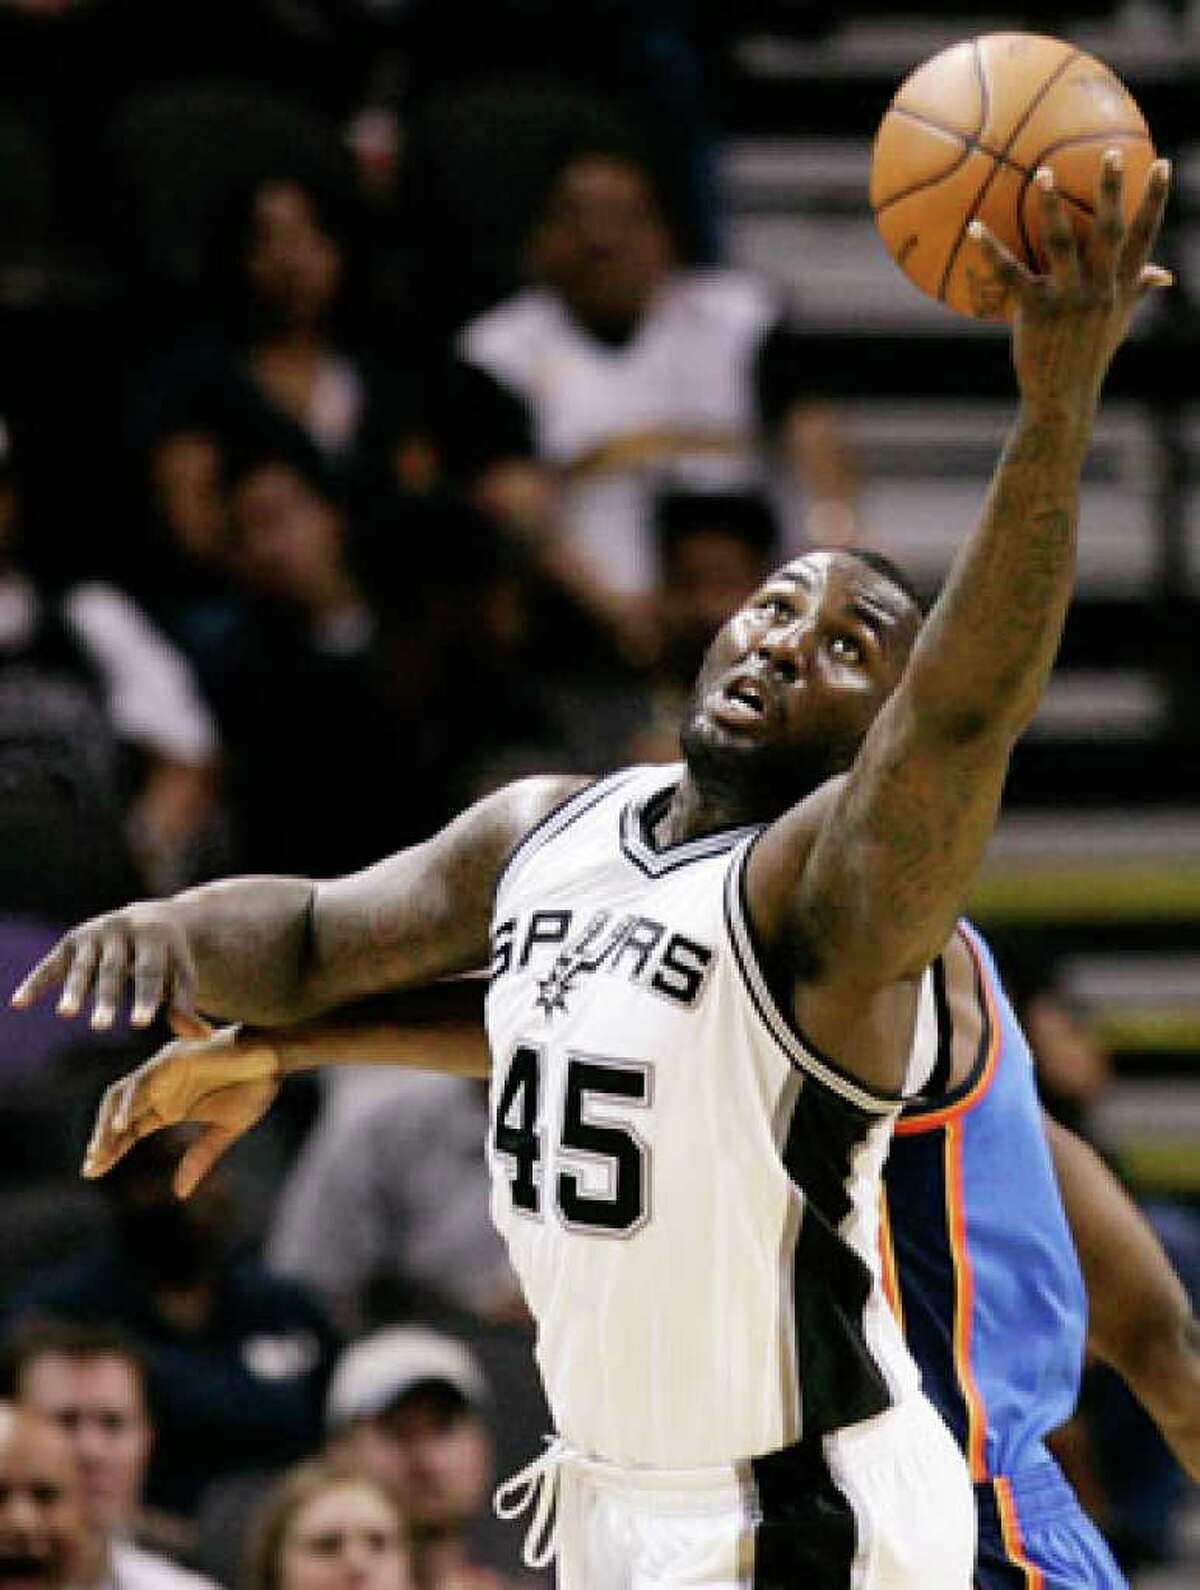 Spurs center DeJuan Blair averaged 7.8 points and 6.4 assists in about 18 minutes per game as a rookie.